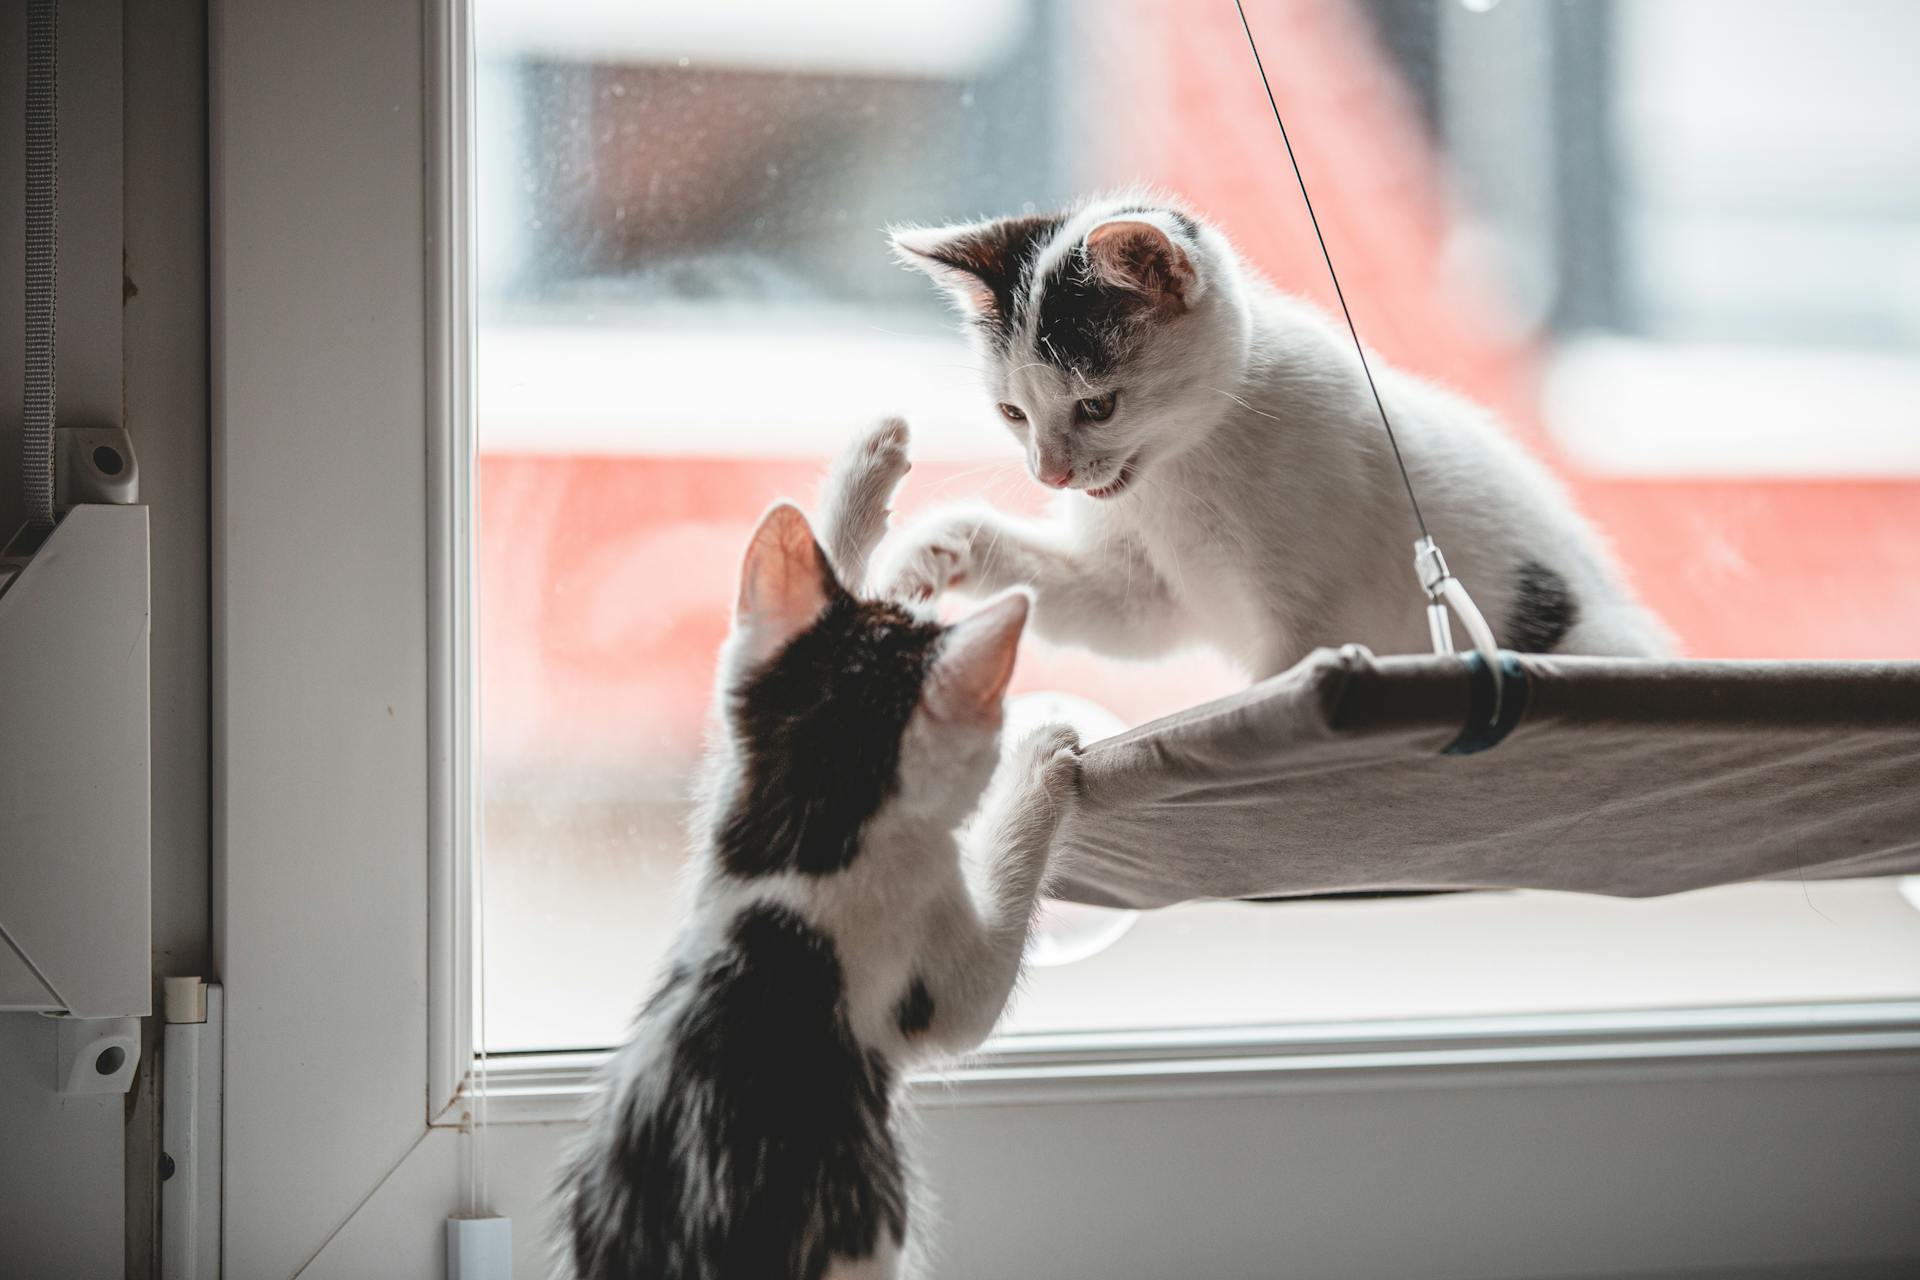 Two kittens playing by a perch next to a window